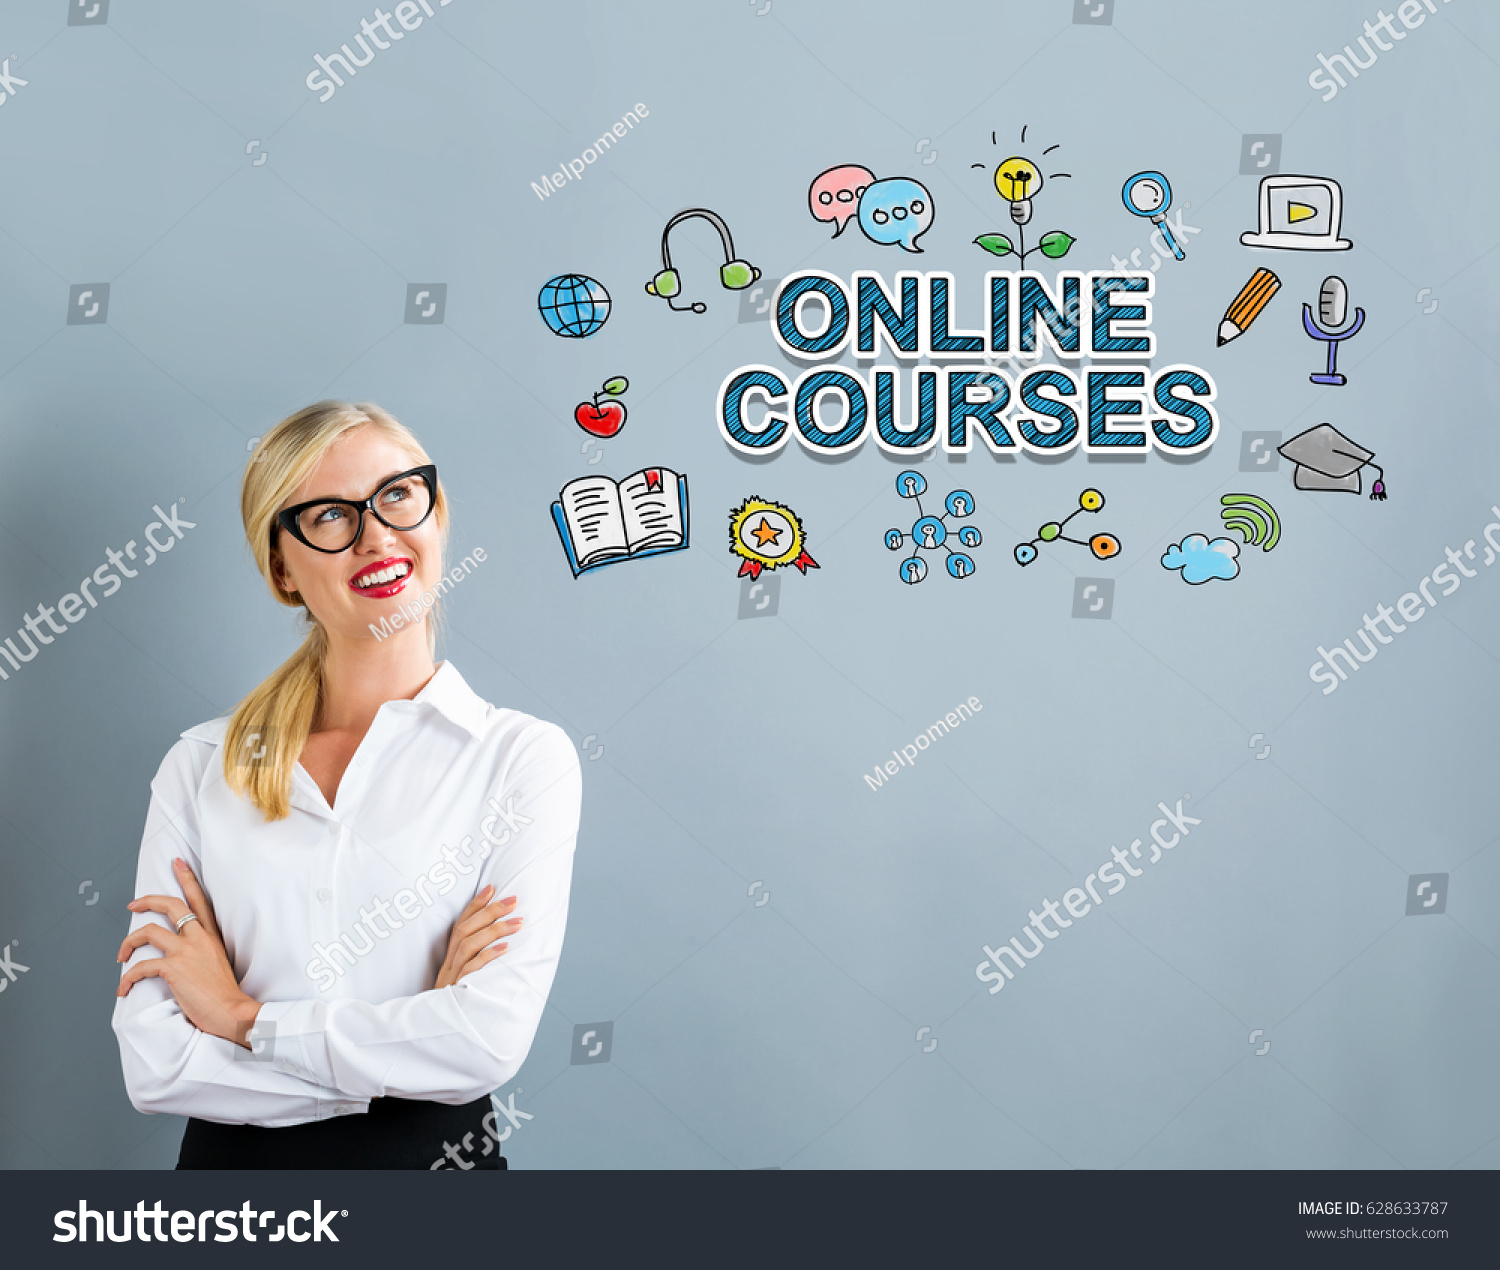 Online Courses text with business woman on a gray background #628633787